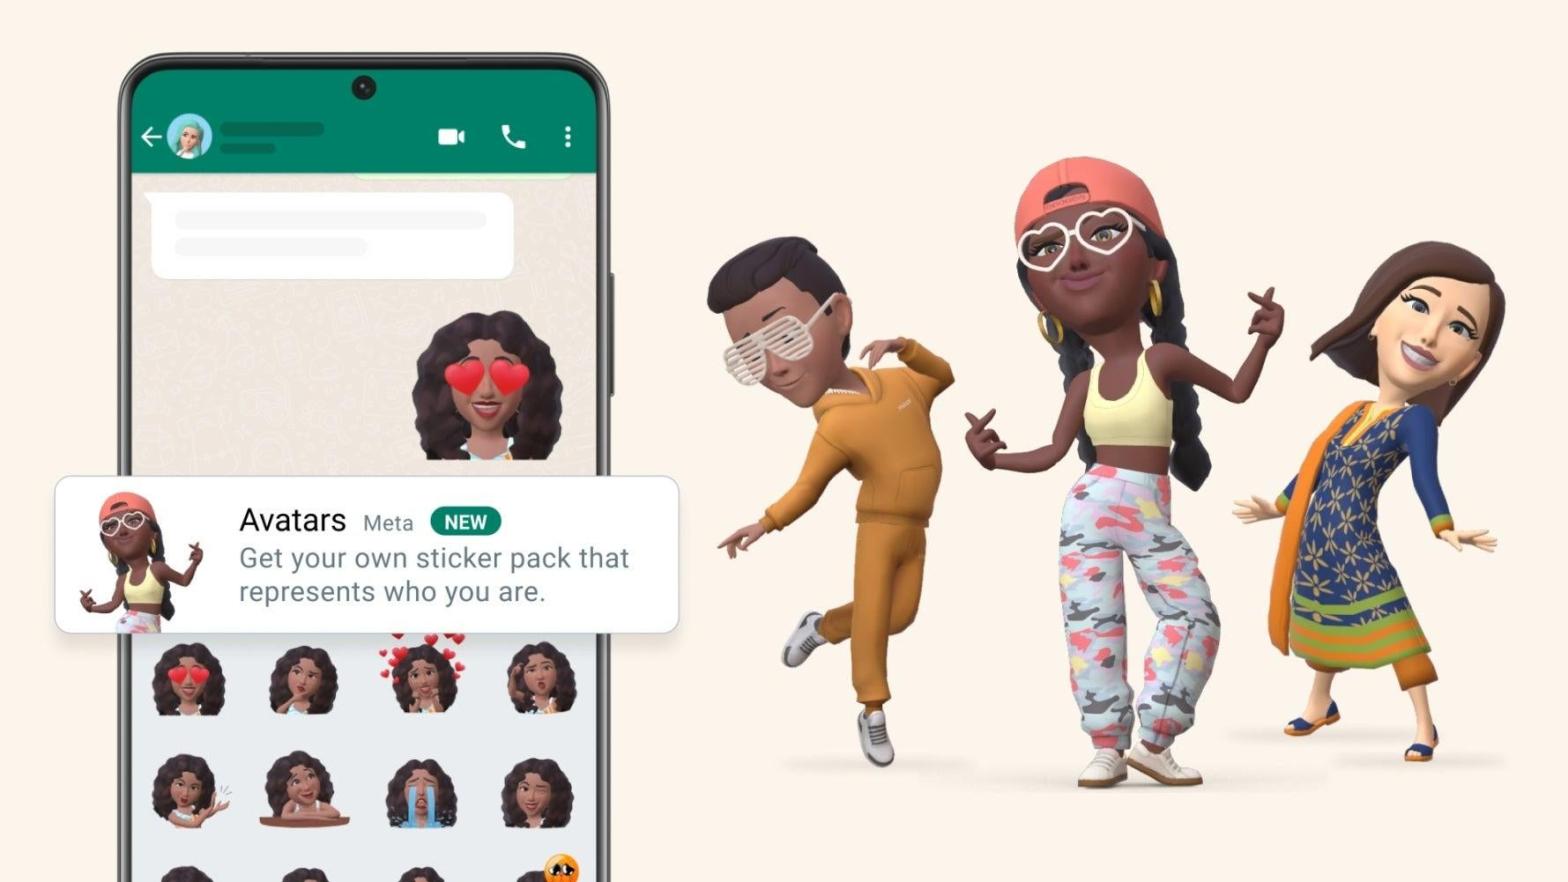 Meta's avatars are heading to WhatsApp, though they won't have the cross-connectivity with other Meta apps that also feature avatars. (Image: Meta)